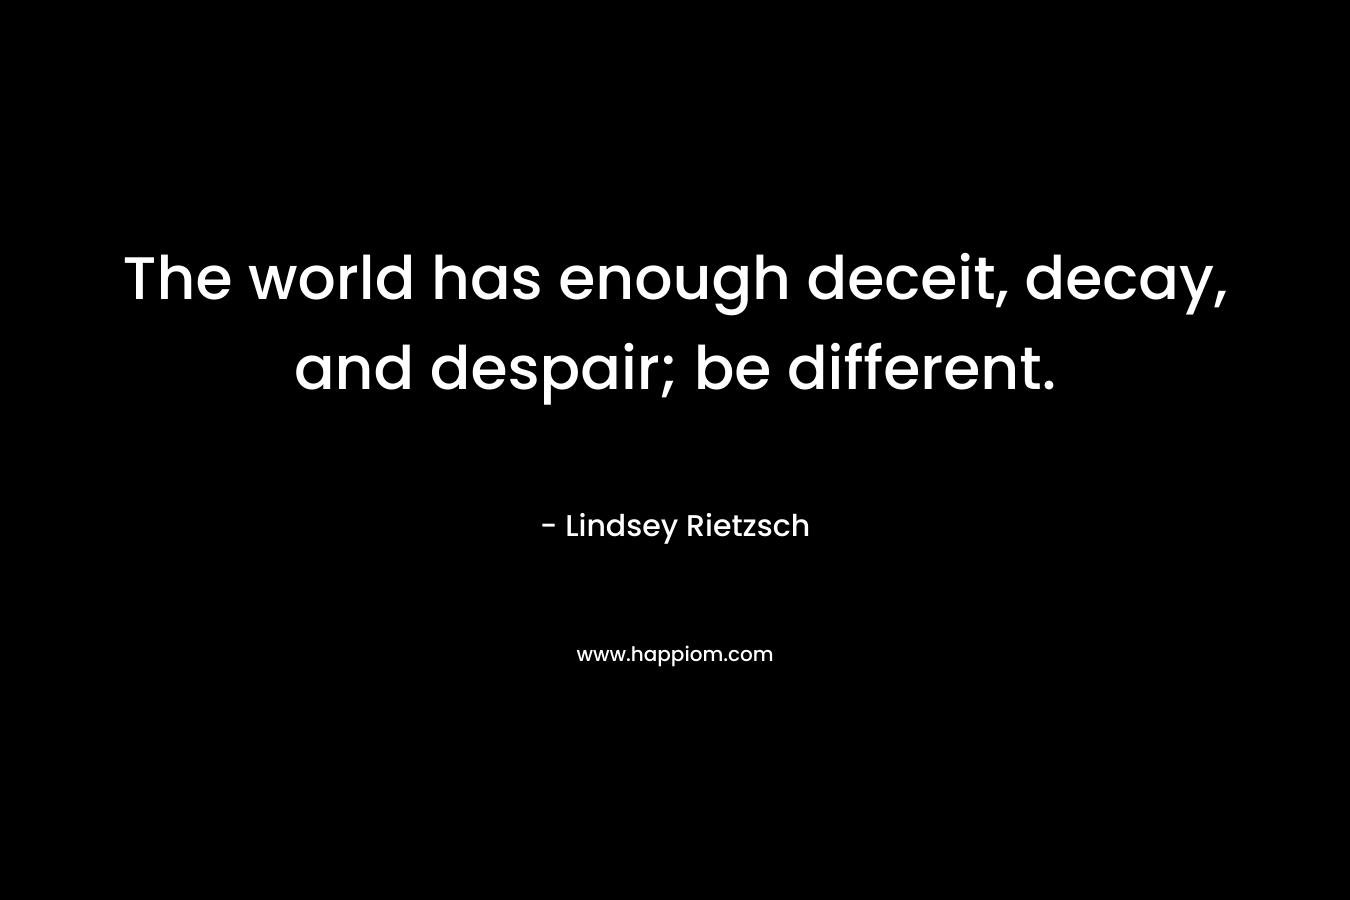 The world has enough deceit, decay, and despair; be different.